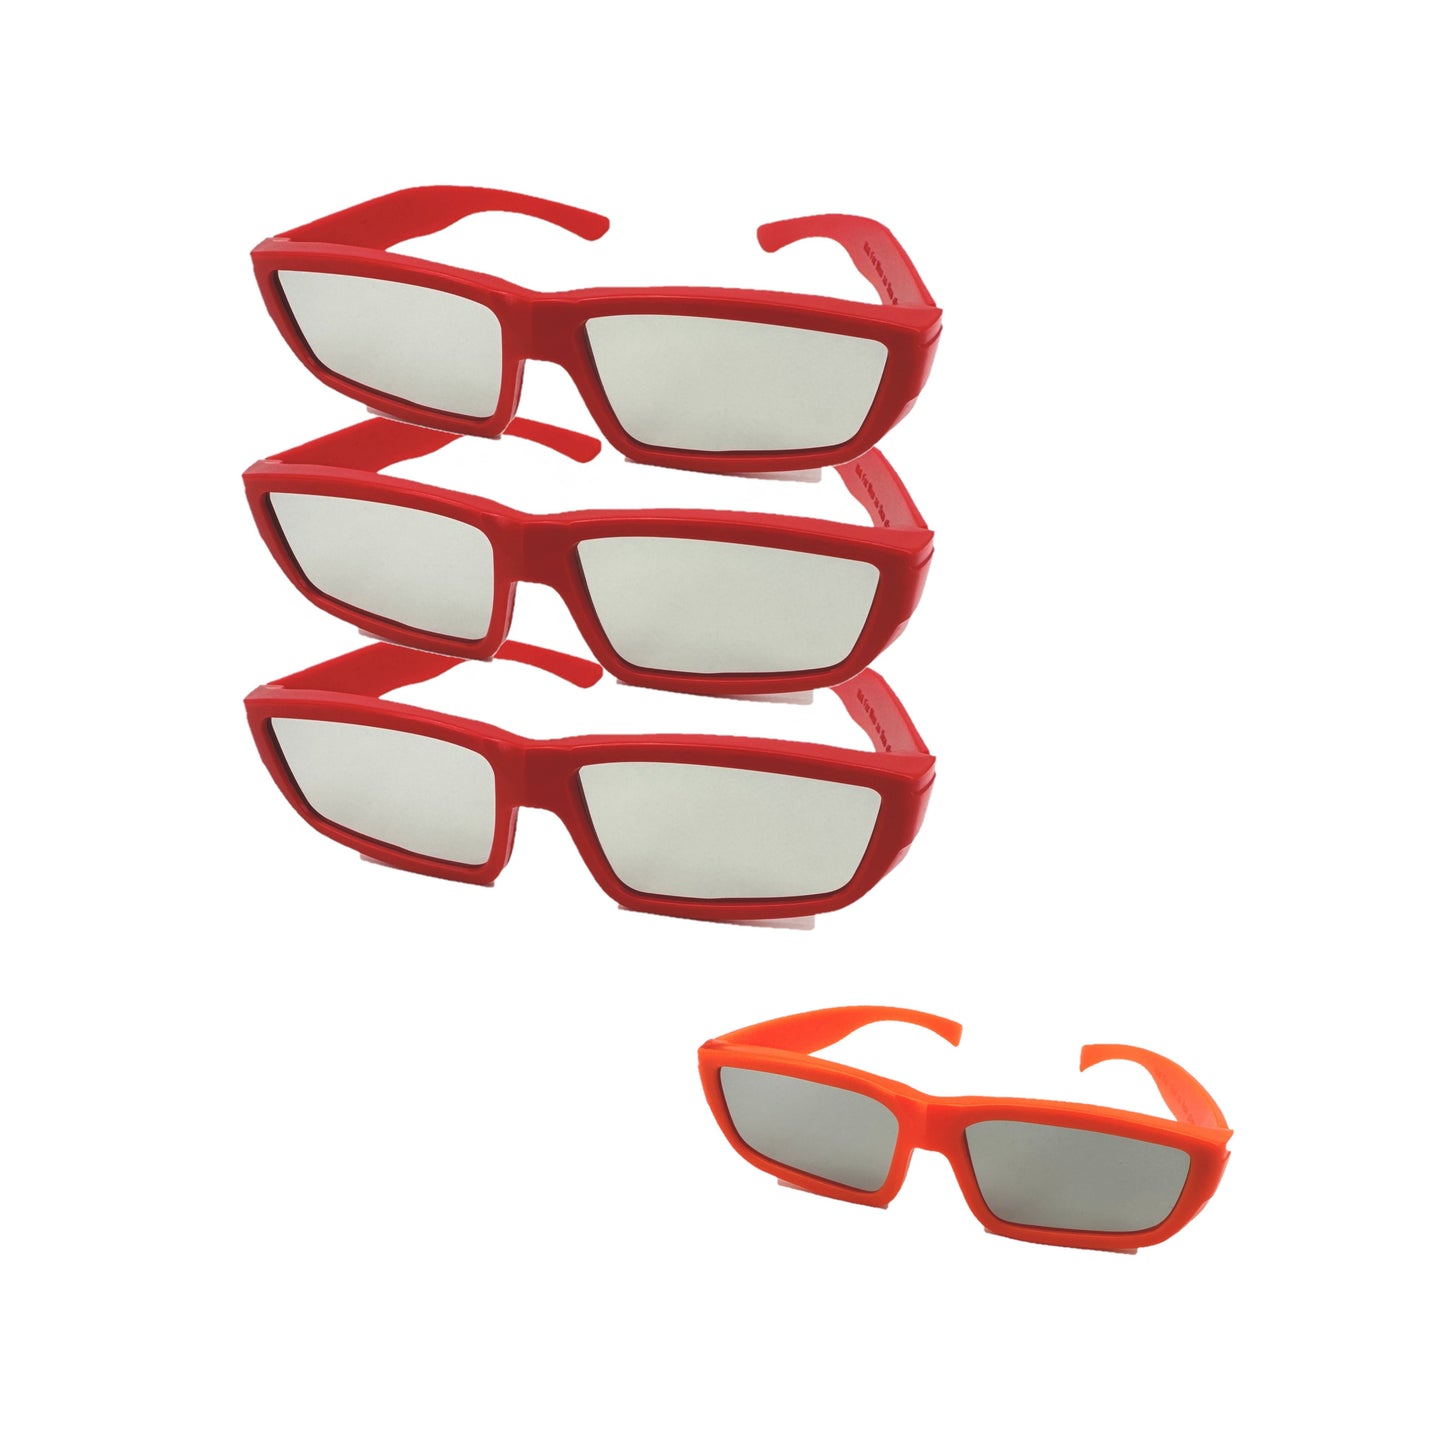 3 Pairs Adult 1 Pairs Kid Bookishbunny Solar Eclipse Viewers Plastic Glasses Sun Viewing Red